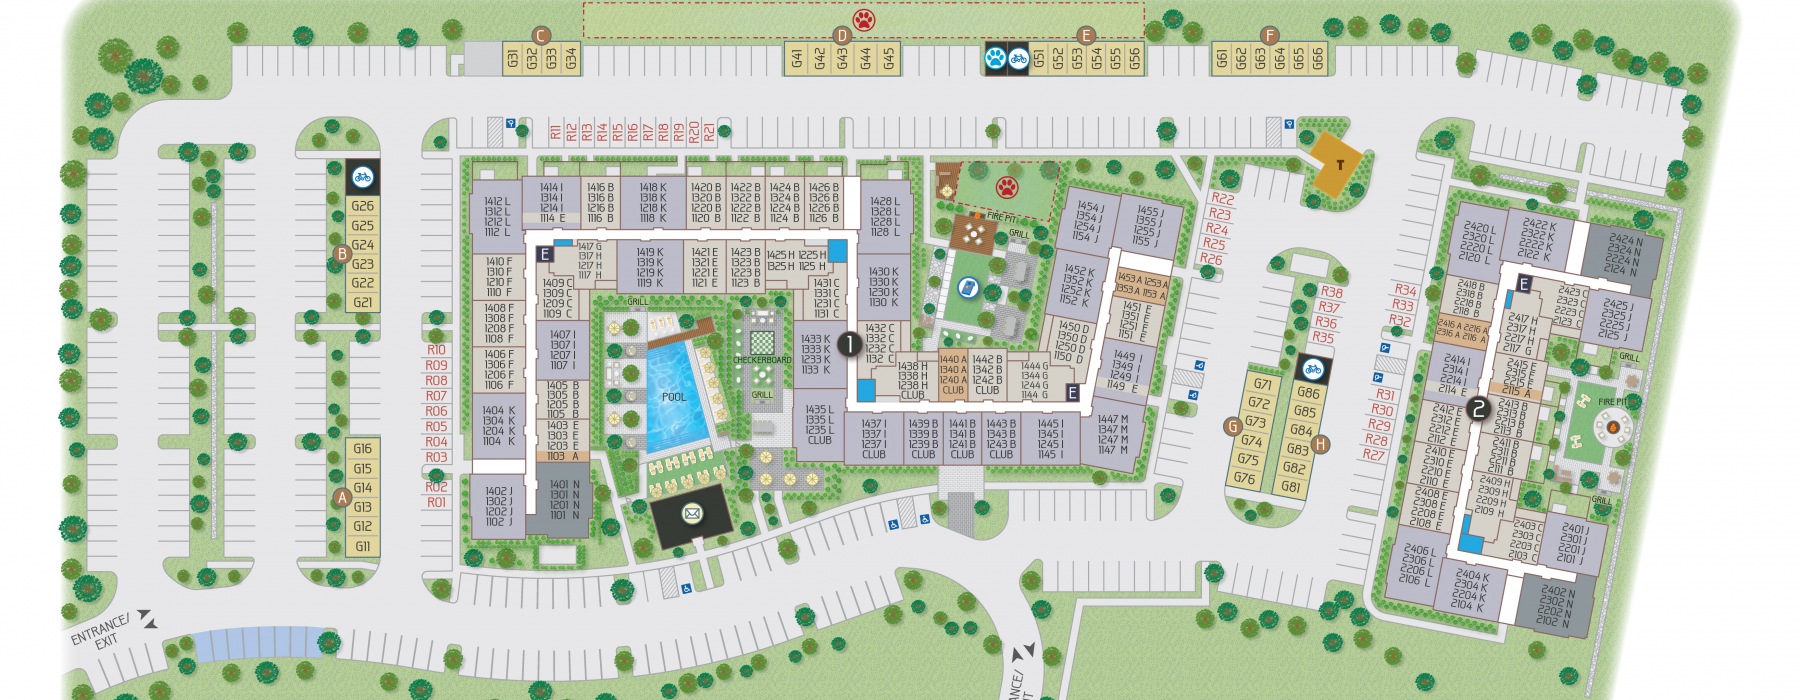 Site map of the property with apartment locations in building 